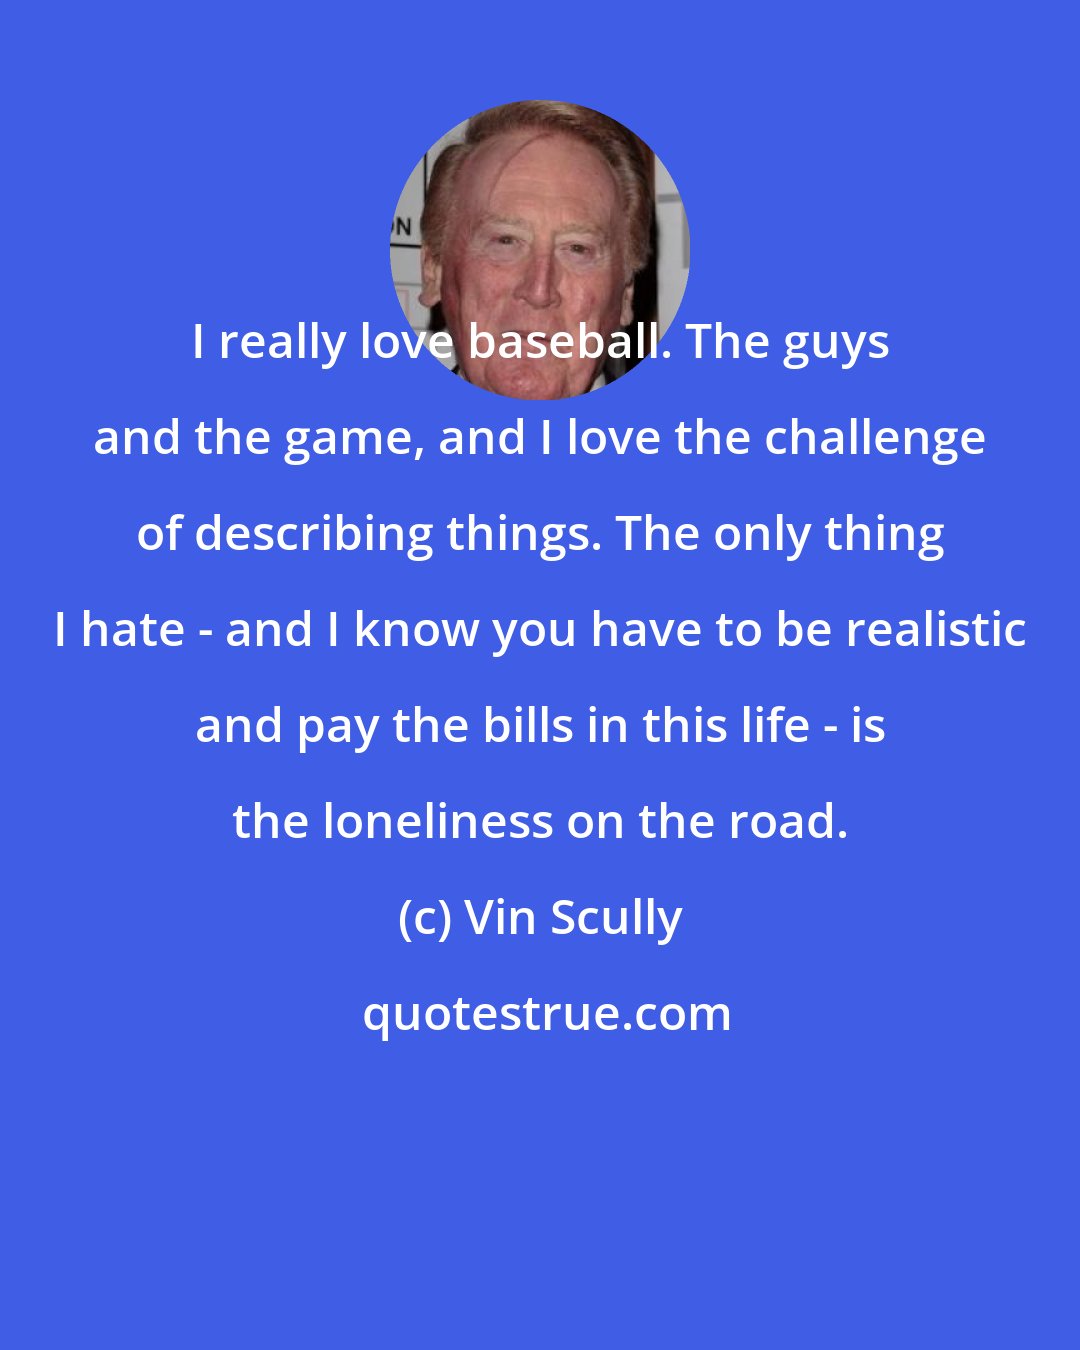 Vin Scully: I really love baseball. The guys and the game, and I love the challenge of describing things. The only thing I hate - and I know you have to be realistic and pay the bills in this life - is the loneliness on the road.